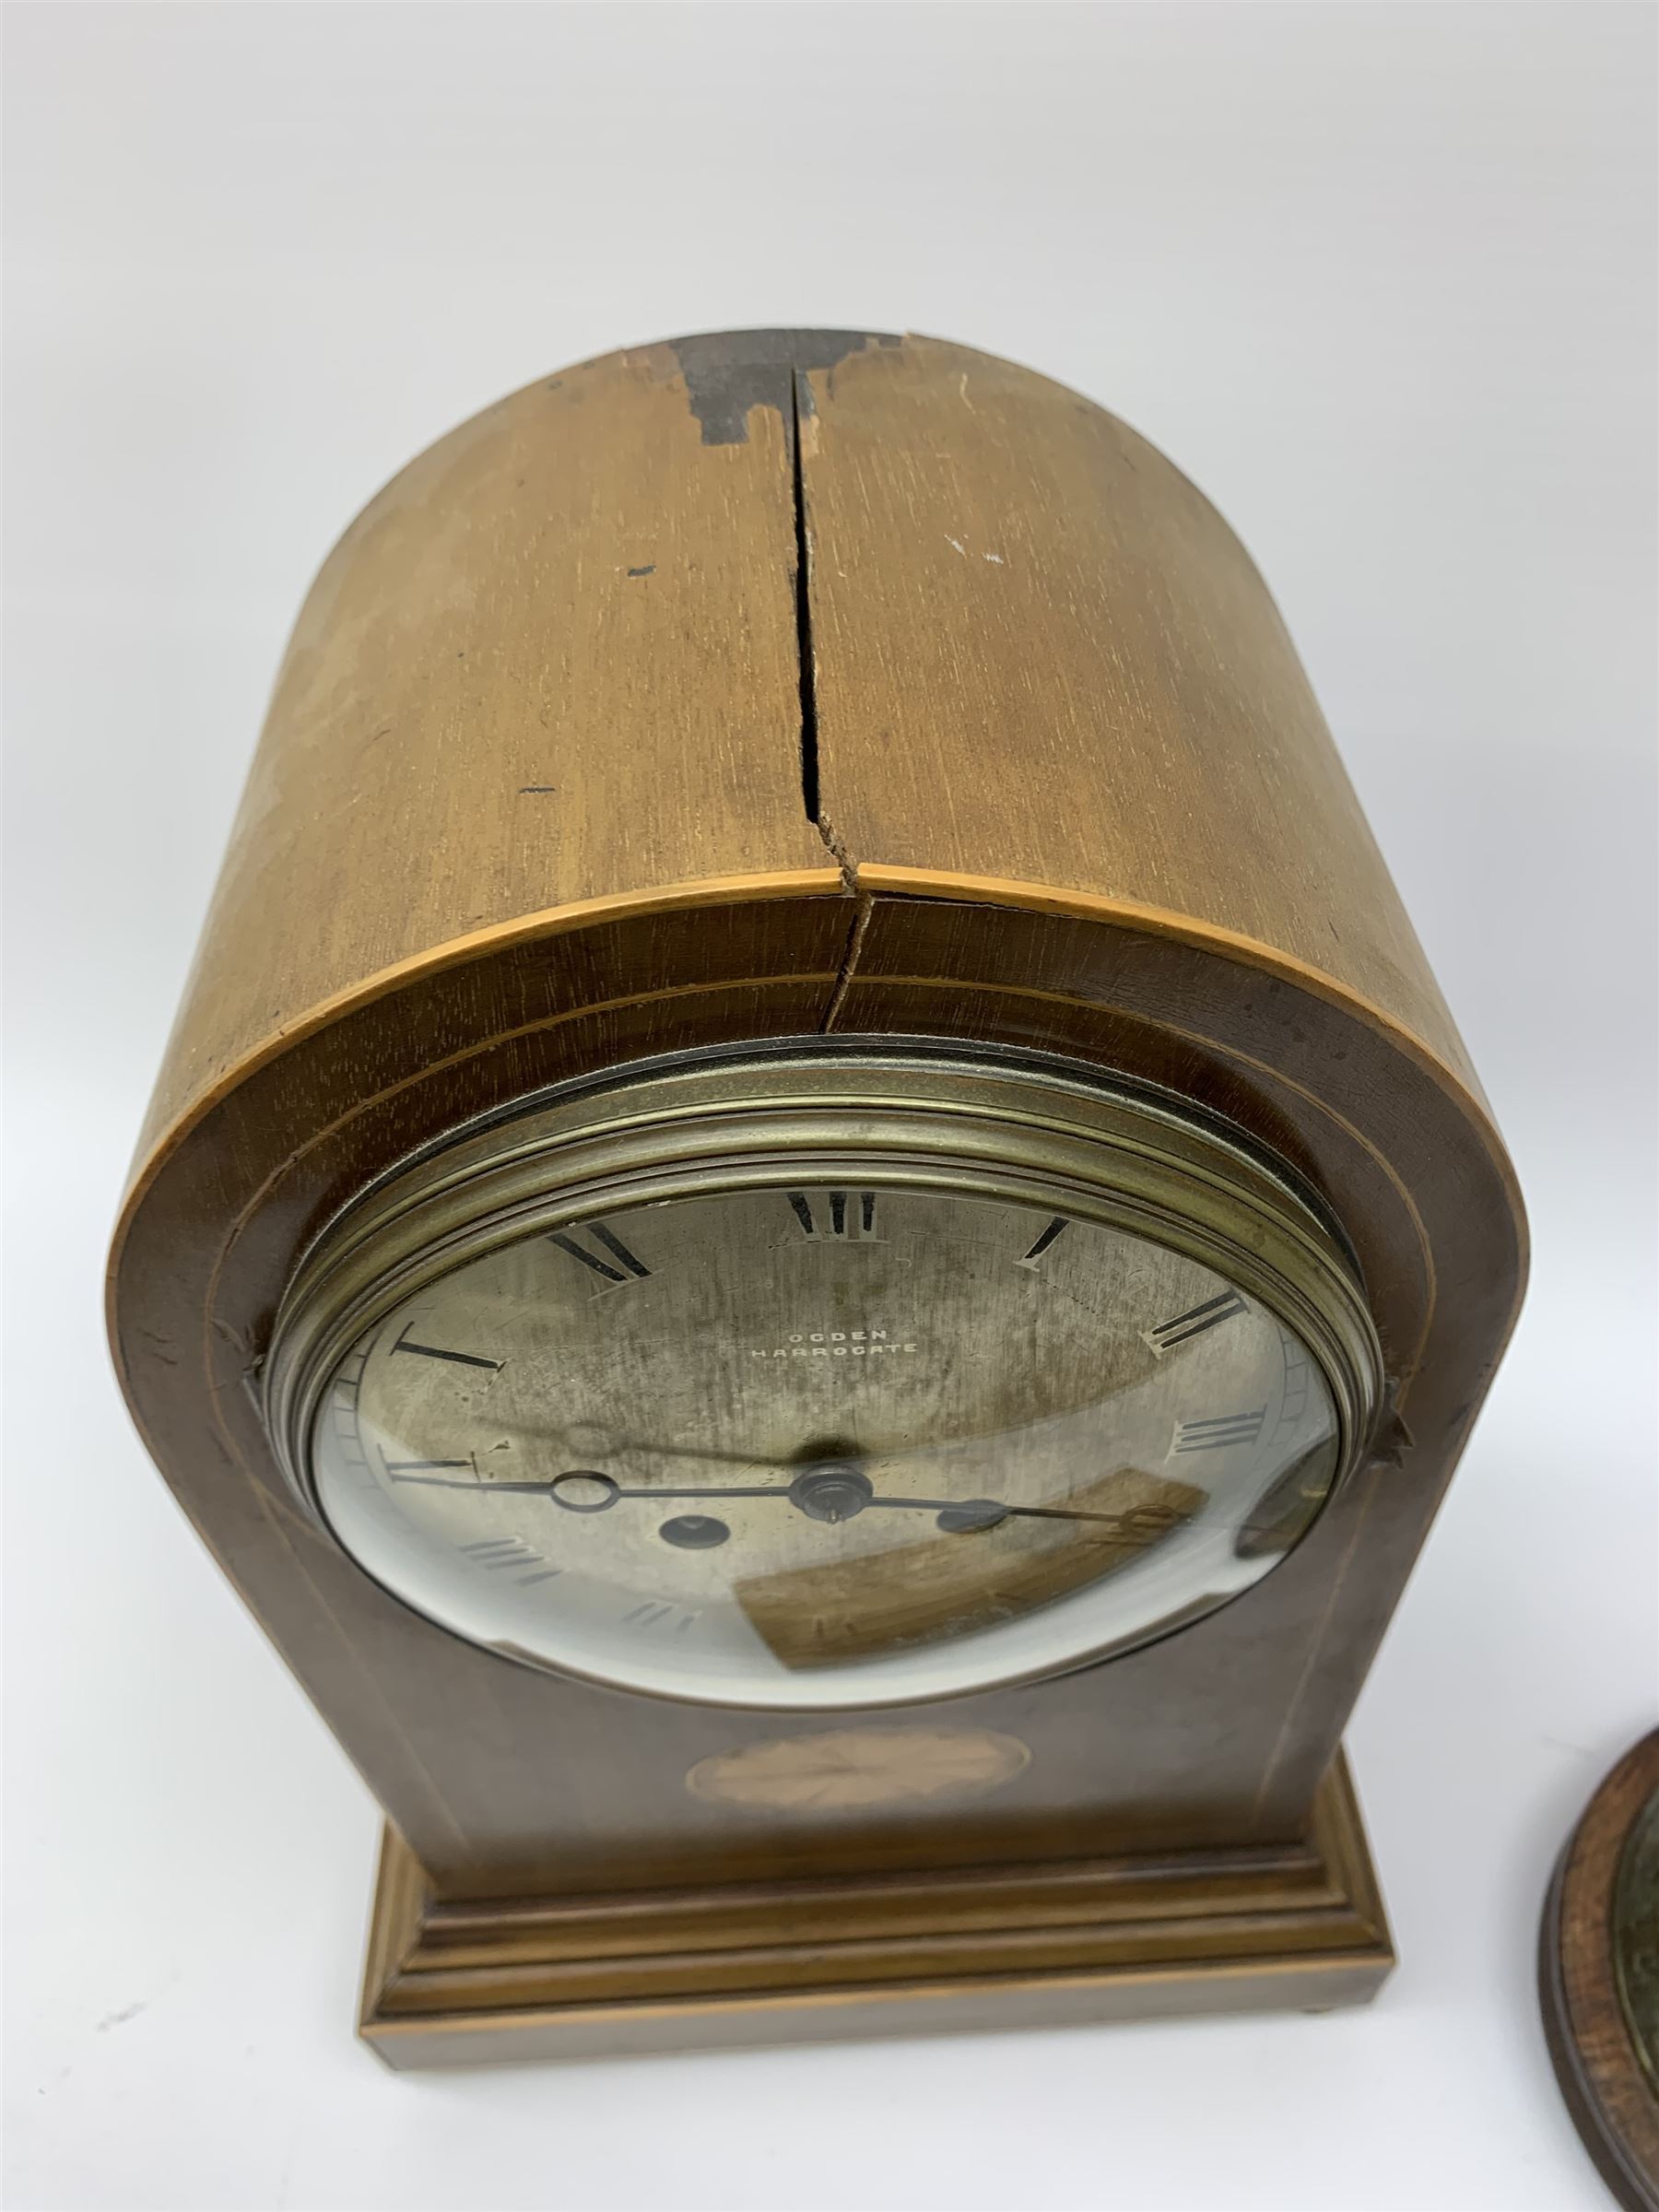 Ogden of Harrogate walnut cased mantel clock with silvered roman dial - Image 2 of 6